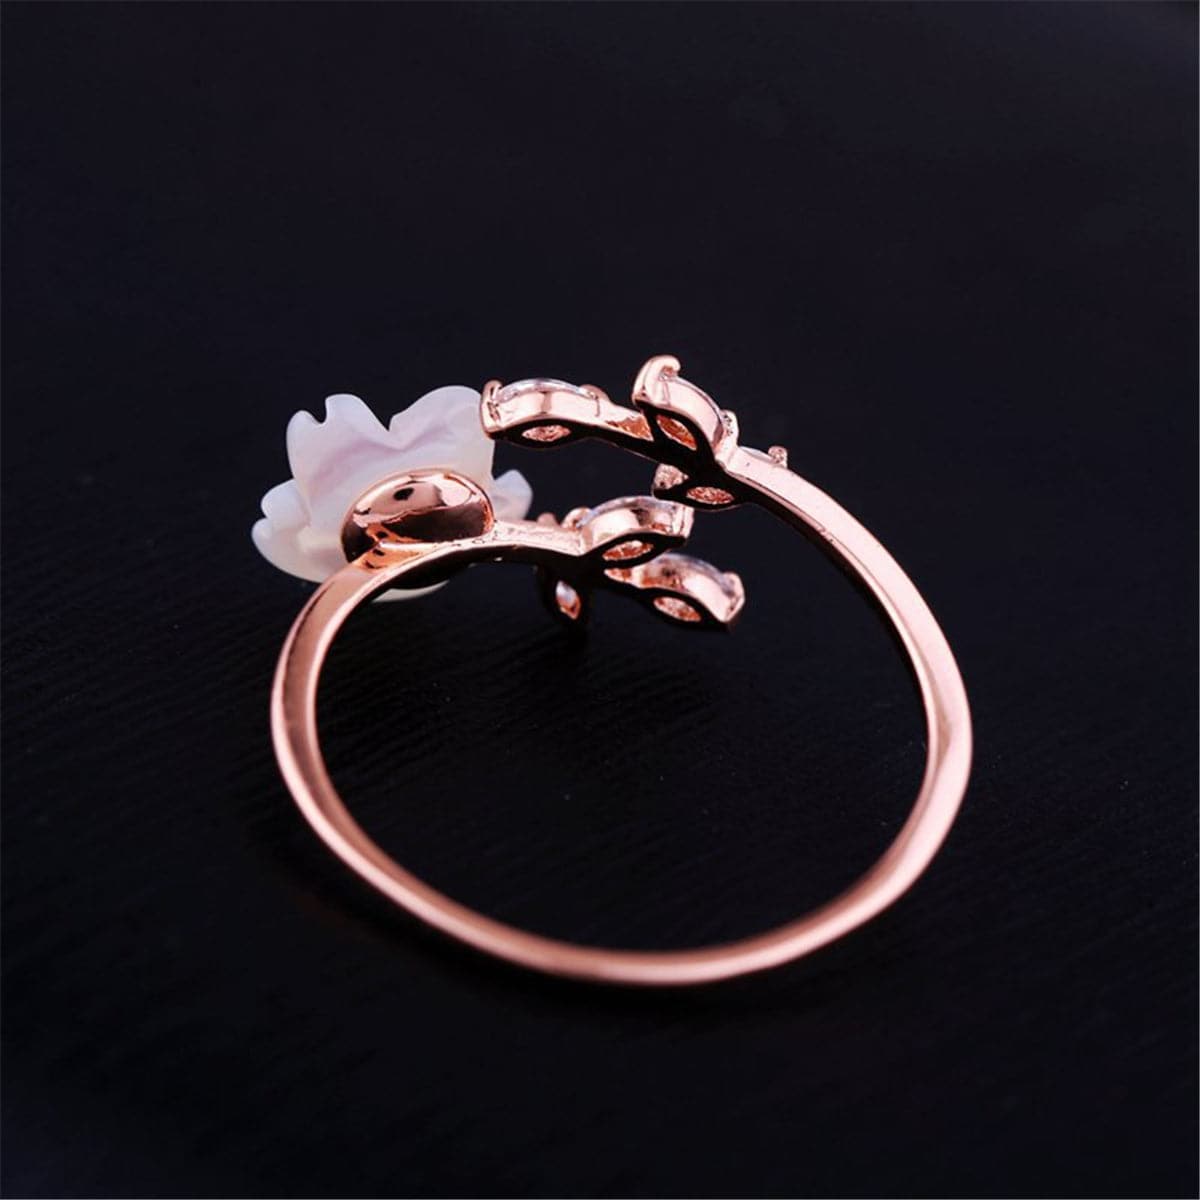 Crystal & 18k Rose Gold-Plated Floral Bypass Ring - streetregion